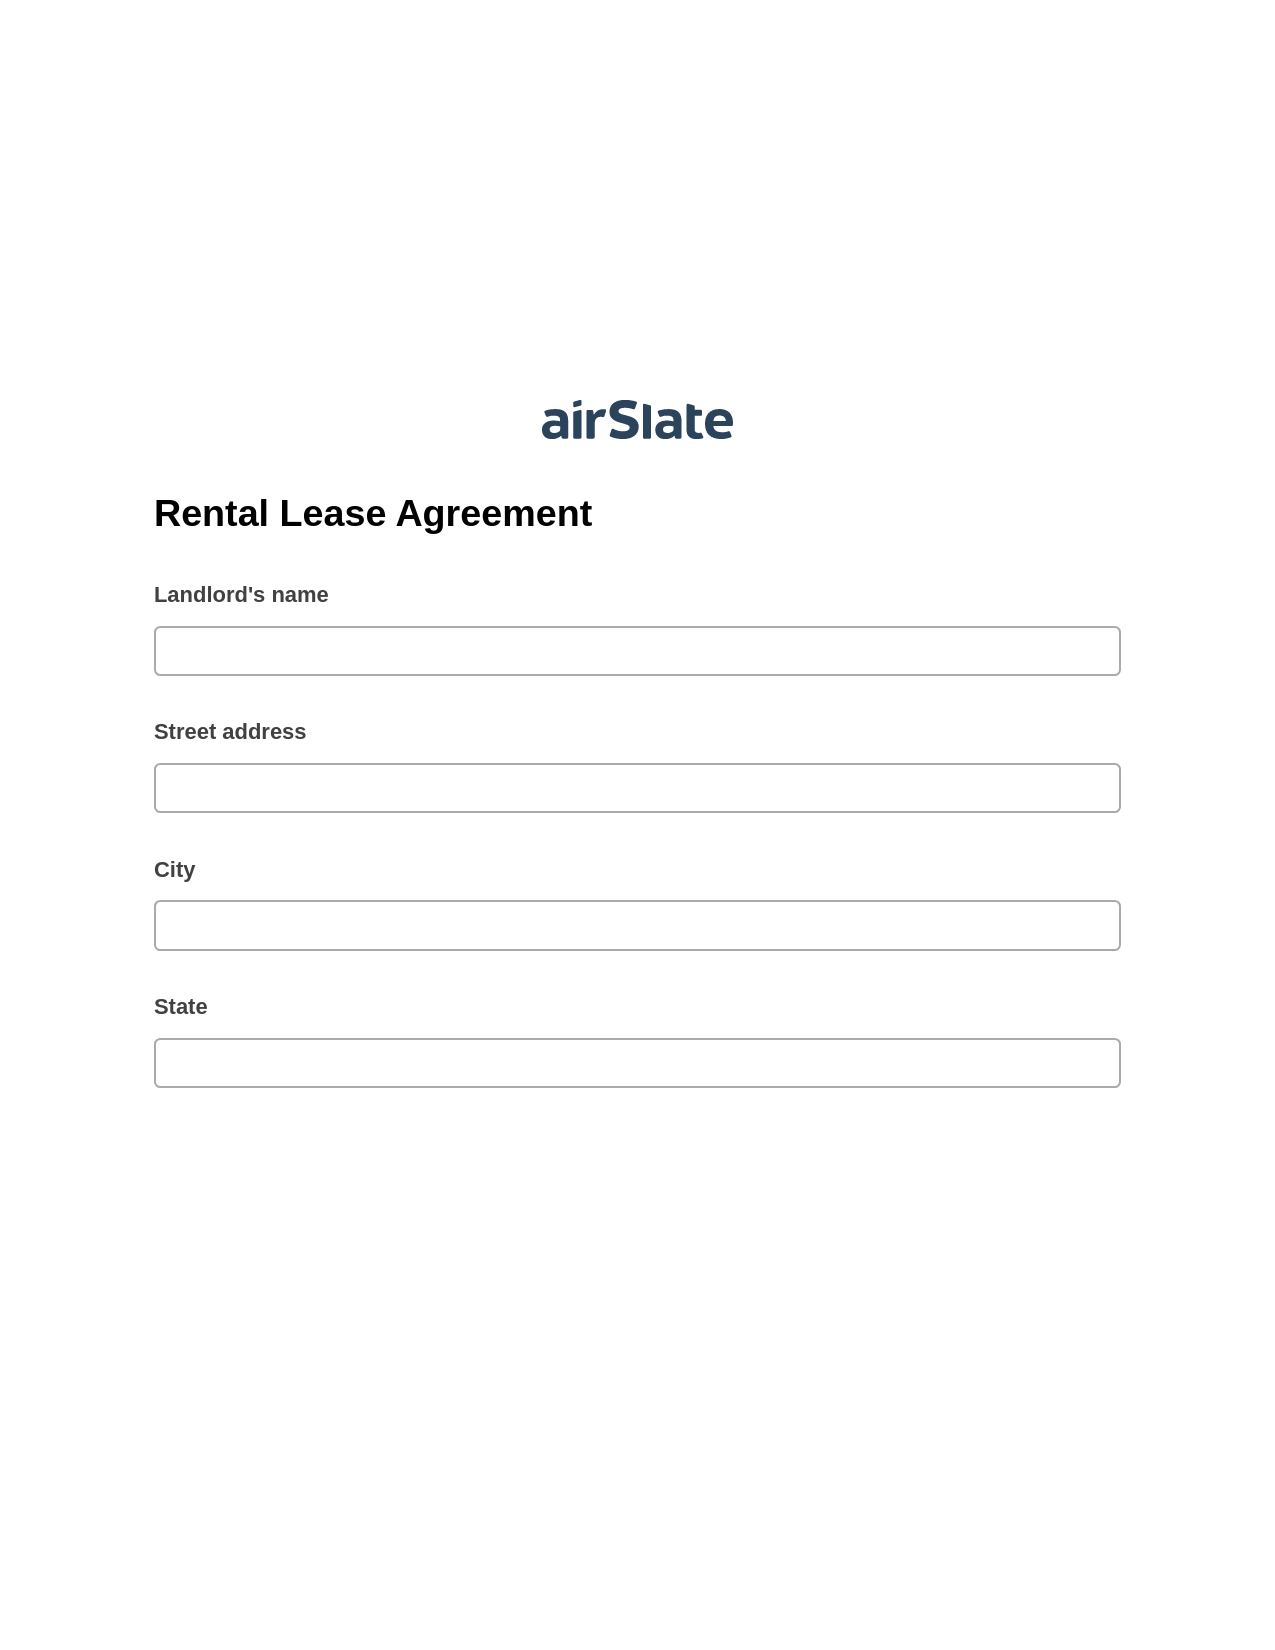 Rental Lease Agreement Pre-fill Slate from MS Dynamics 365 Records Bot, Invoke Salesforce Process Bot, Export to NetSuite Record Bot